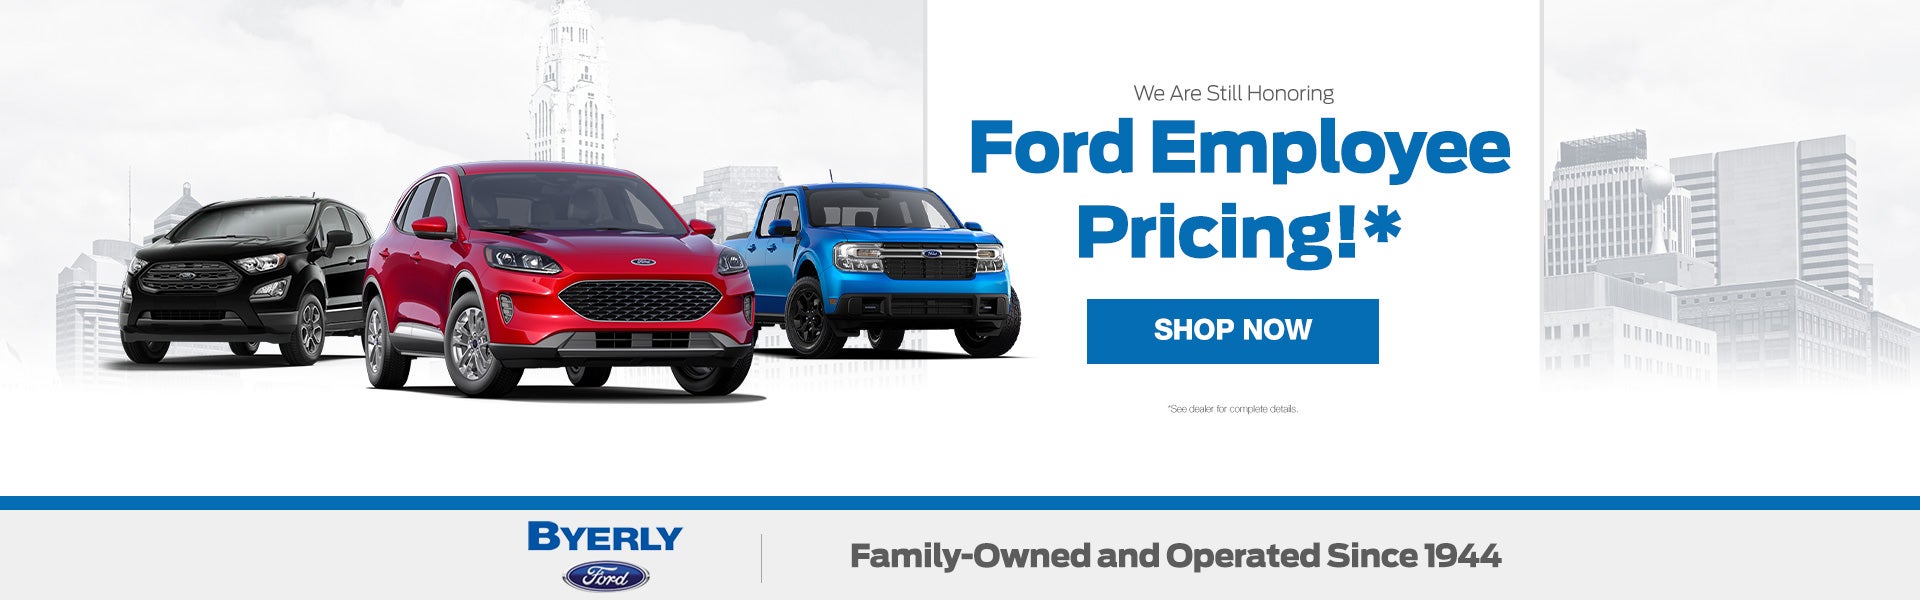 Ford Employee Pricing